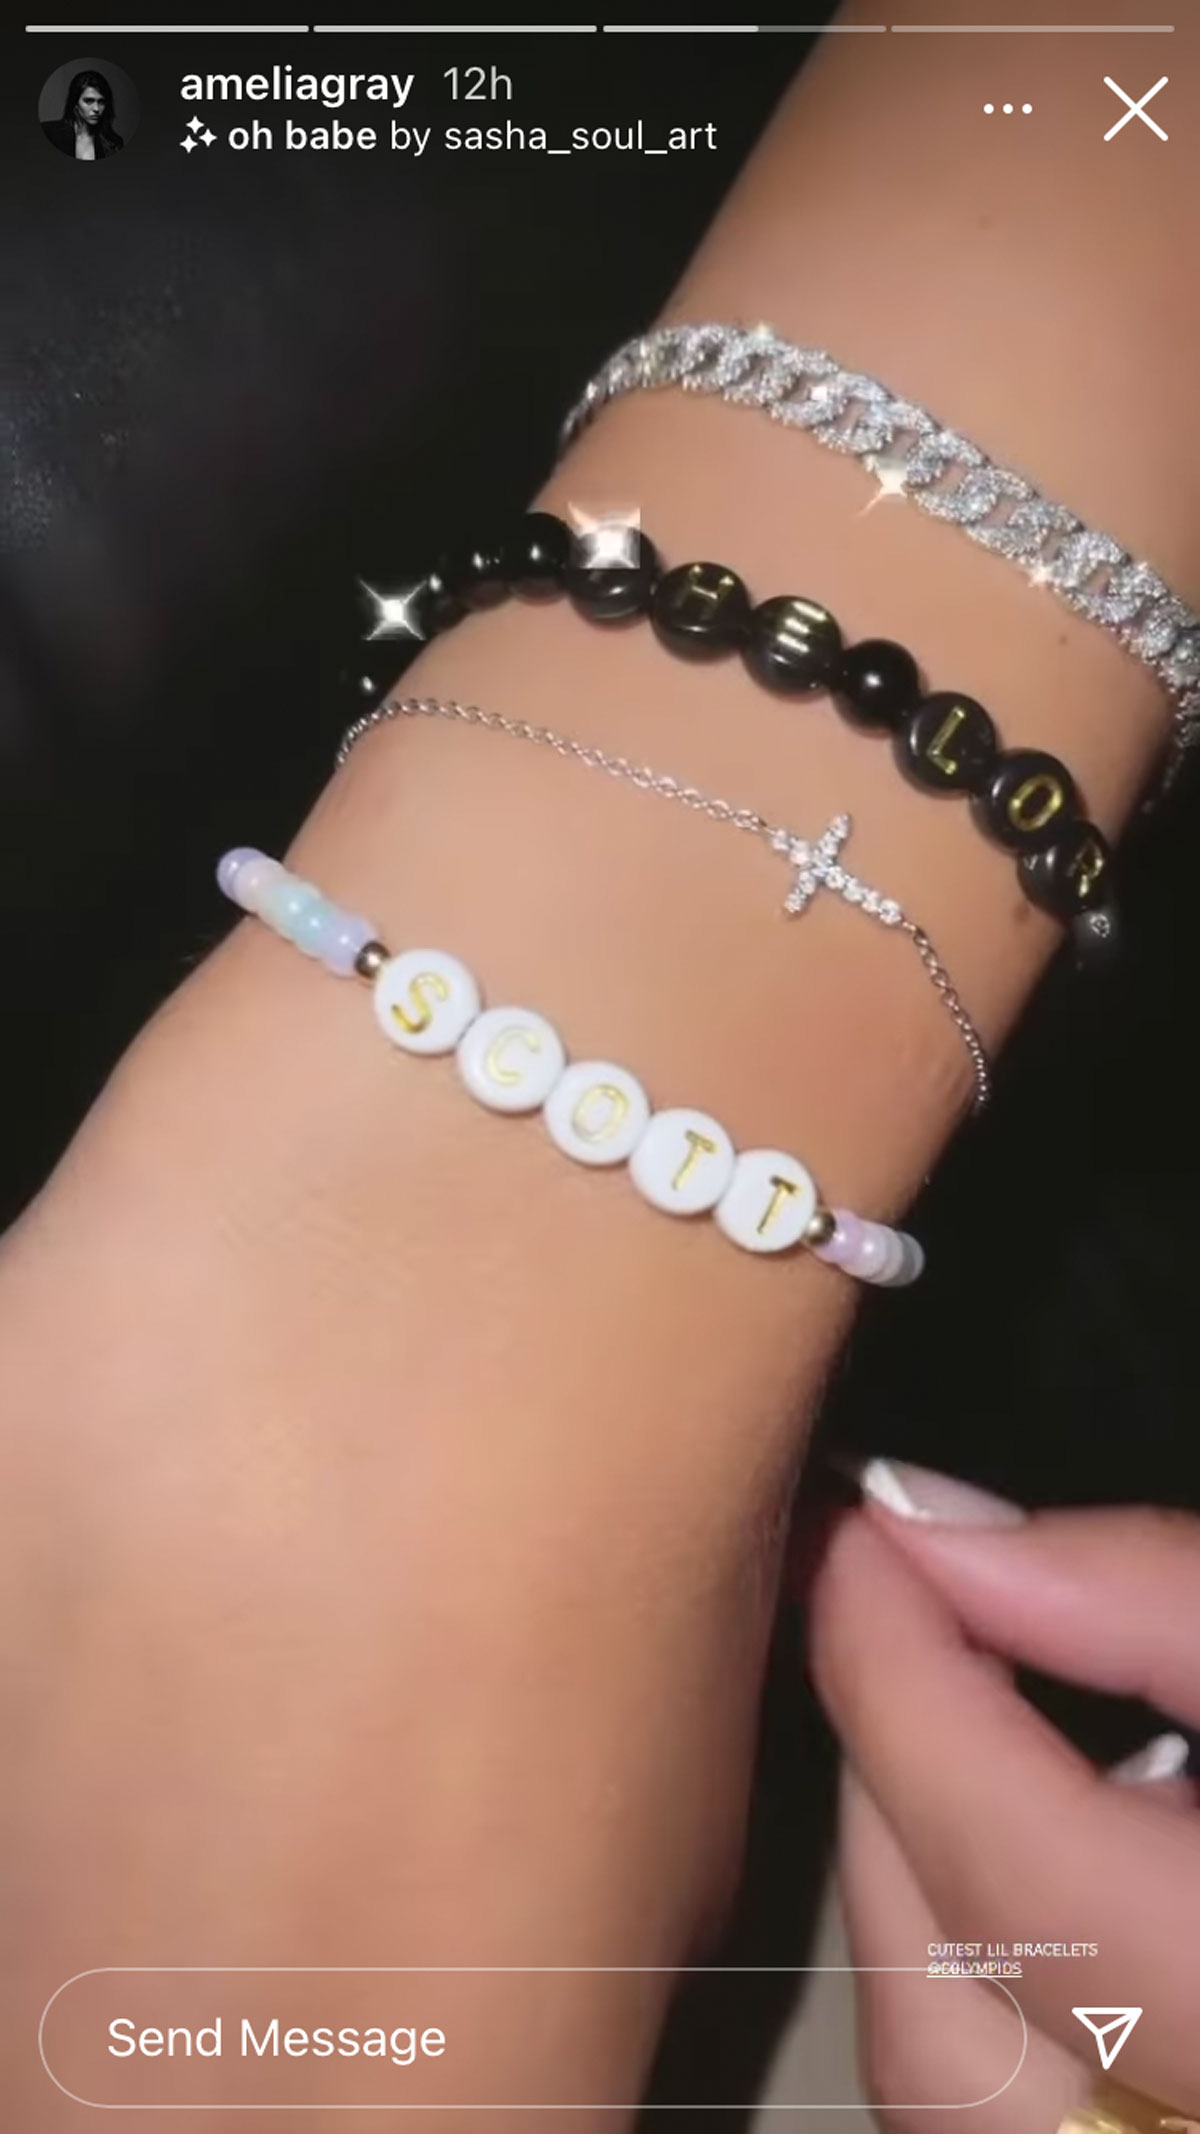 Amelia Hamlin is showing off a new bracelet with Scott Disick's name on it!